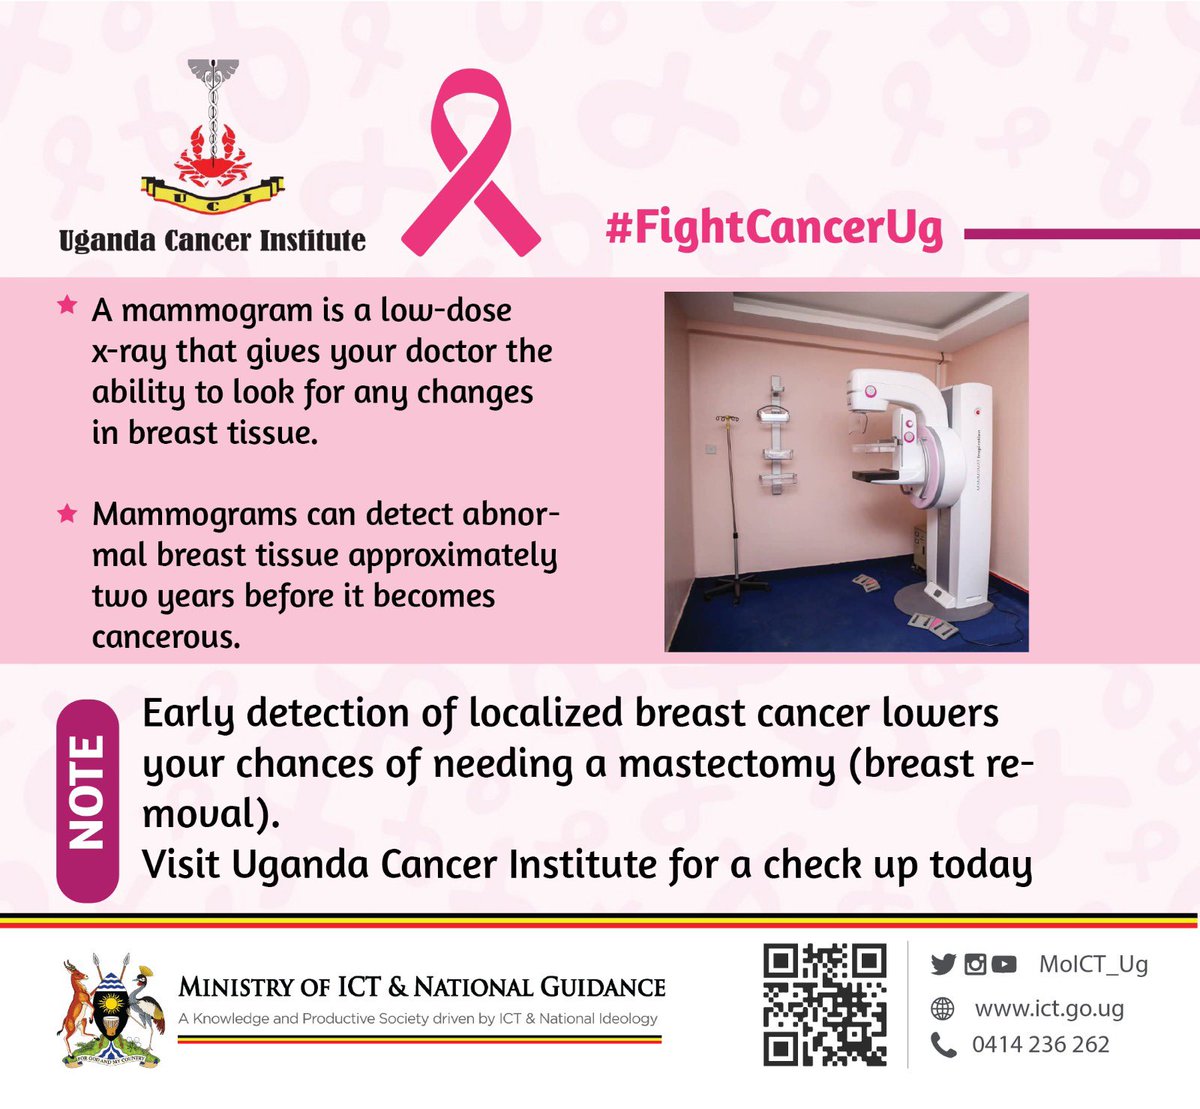 Beating Cancer Starts with Awareness!Let's unite in the fight against cancer by spreading knowledge and raising awareness about its prevention,early detection and treatment options. Together,we can make a difference and save lives! #FightCancerUg @MosesWatasa @UgandaCancerIns